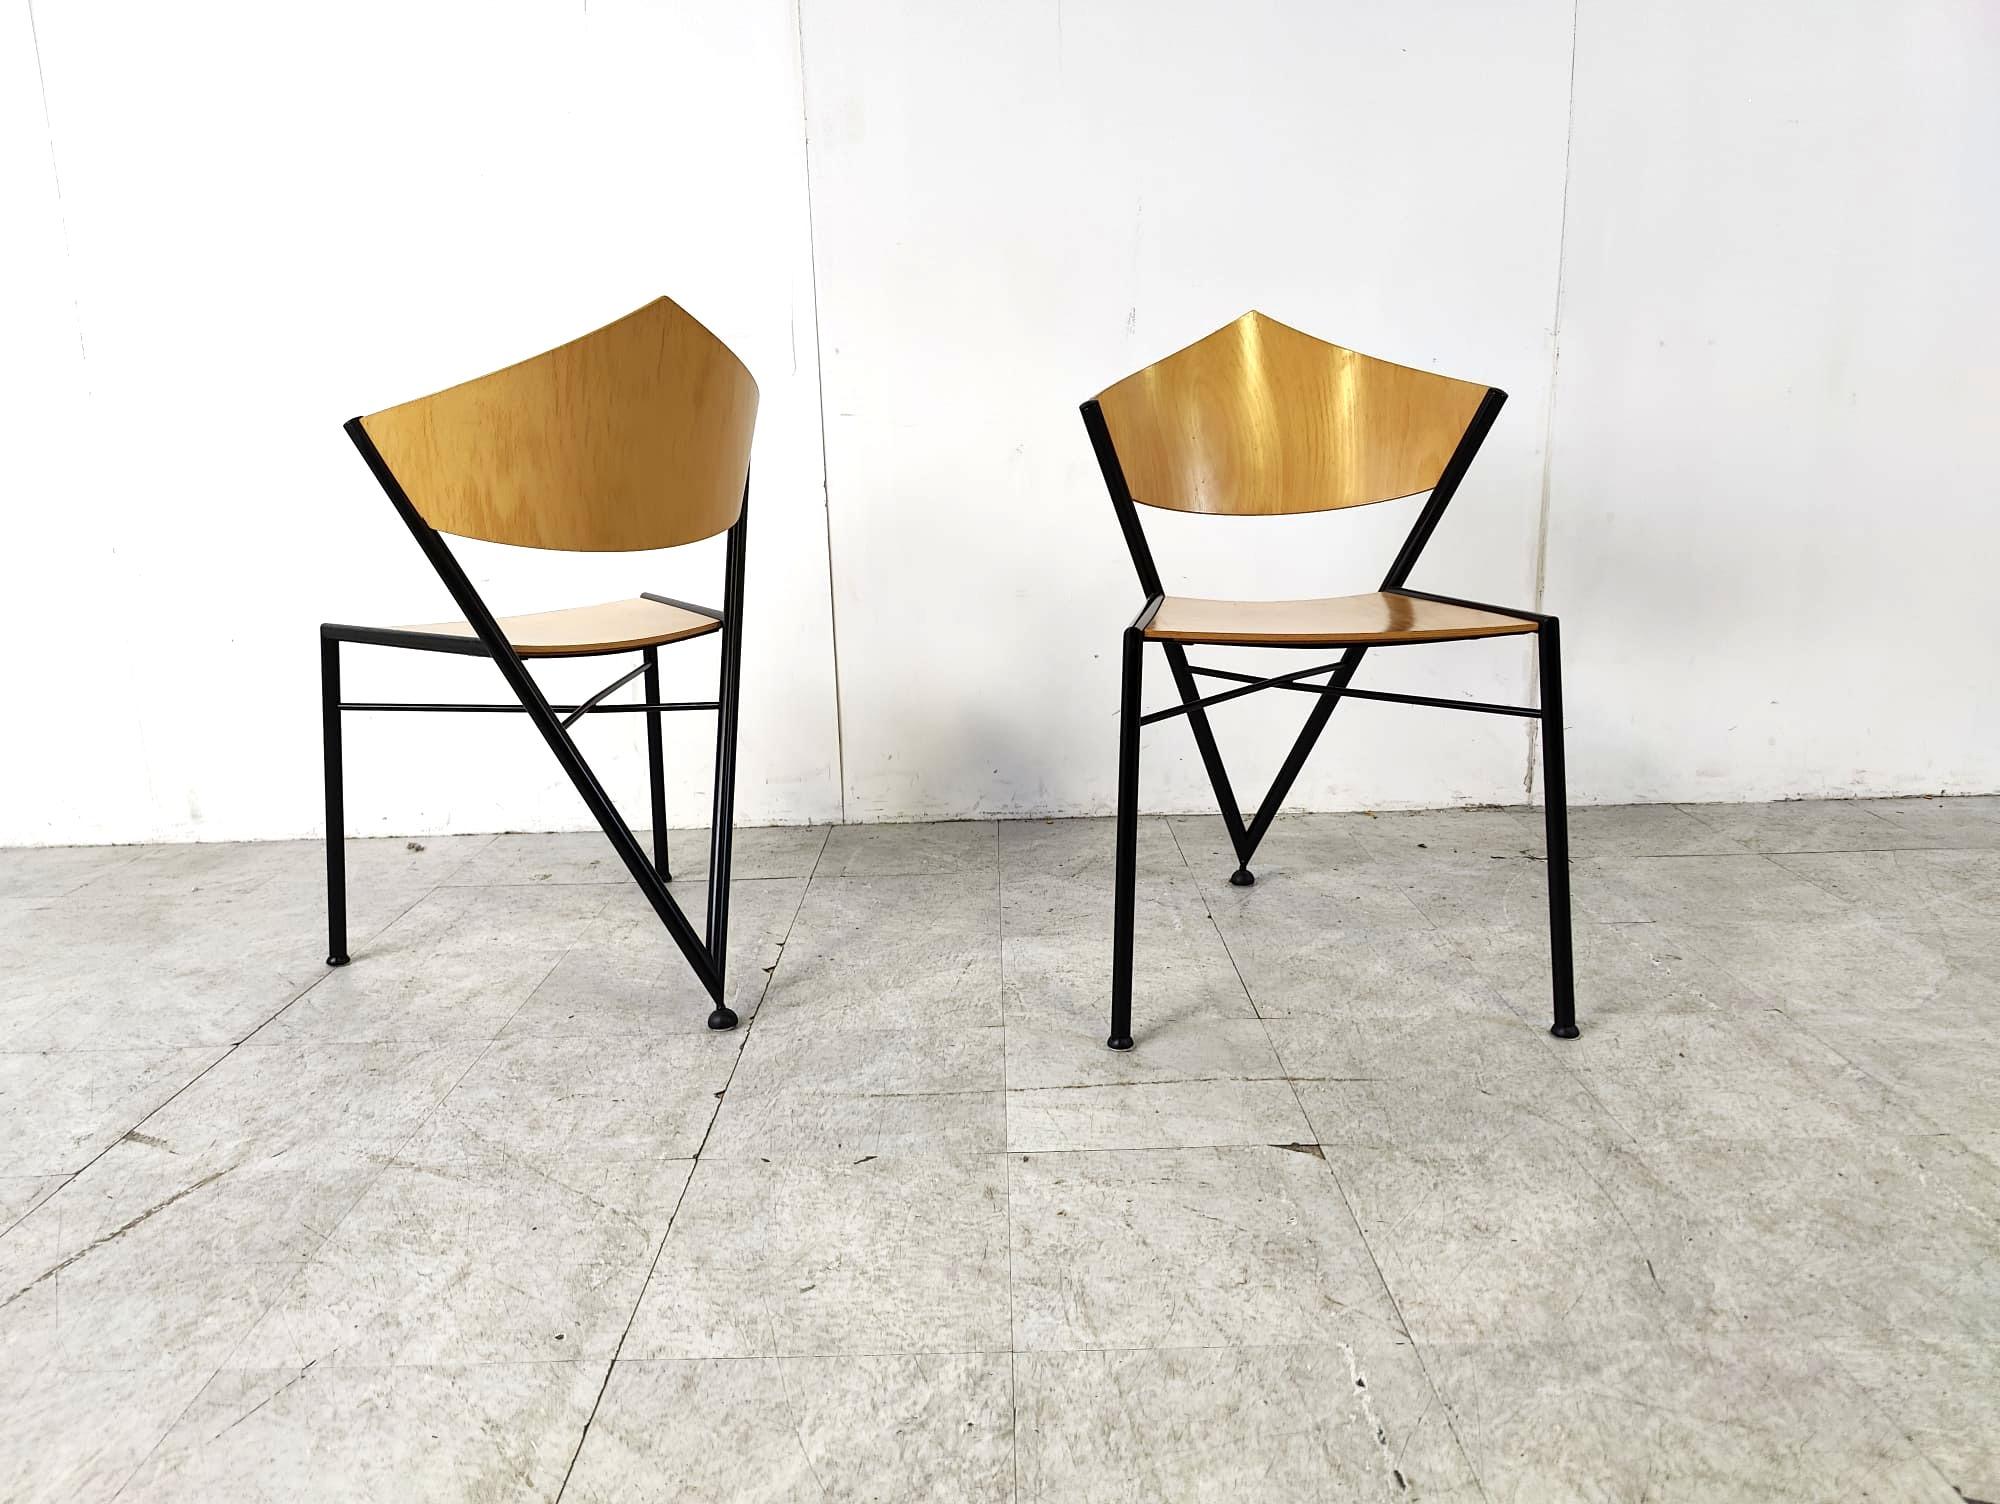 Geometrical post modern design dining chairs made from plywood and black metal.

The chairs are stackable, which is very handy.

Timeless design.

very good condition

1980s - Germany

Dimensions:
Height: 96cm
Width: 48cm
Depth: 43cm
Seat height: